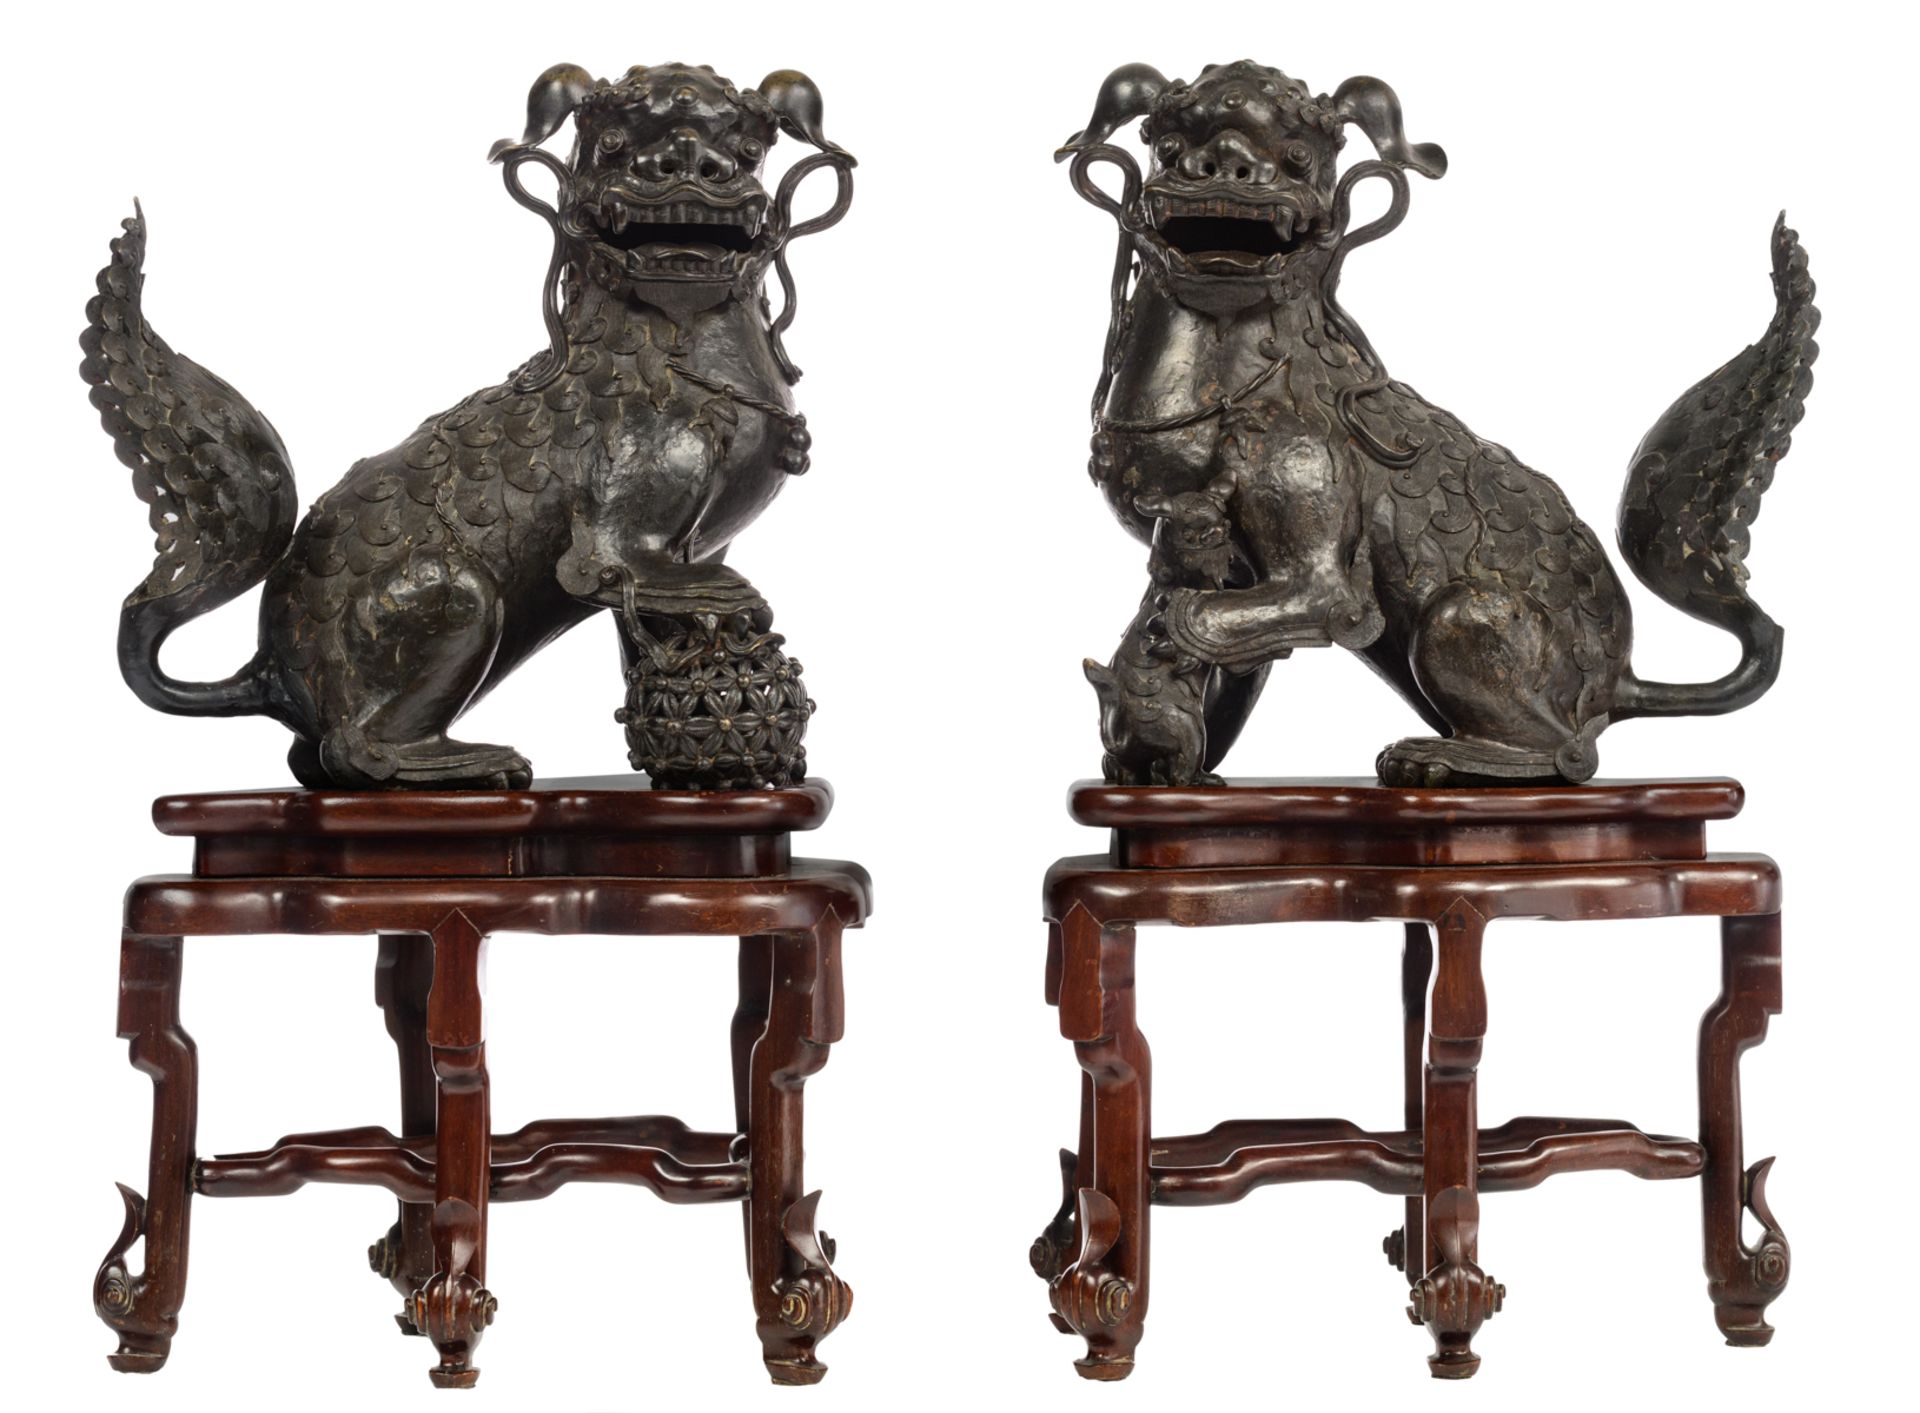 A pair of Japanese bronze playful Shishi dogs